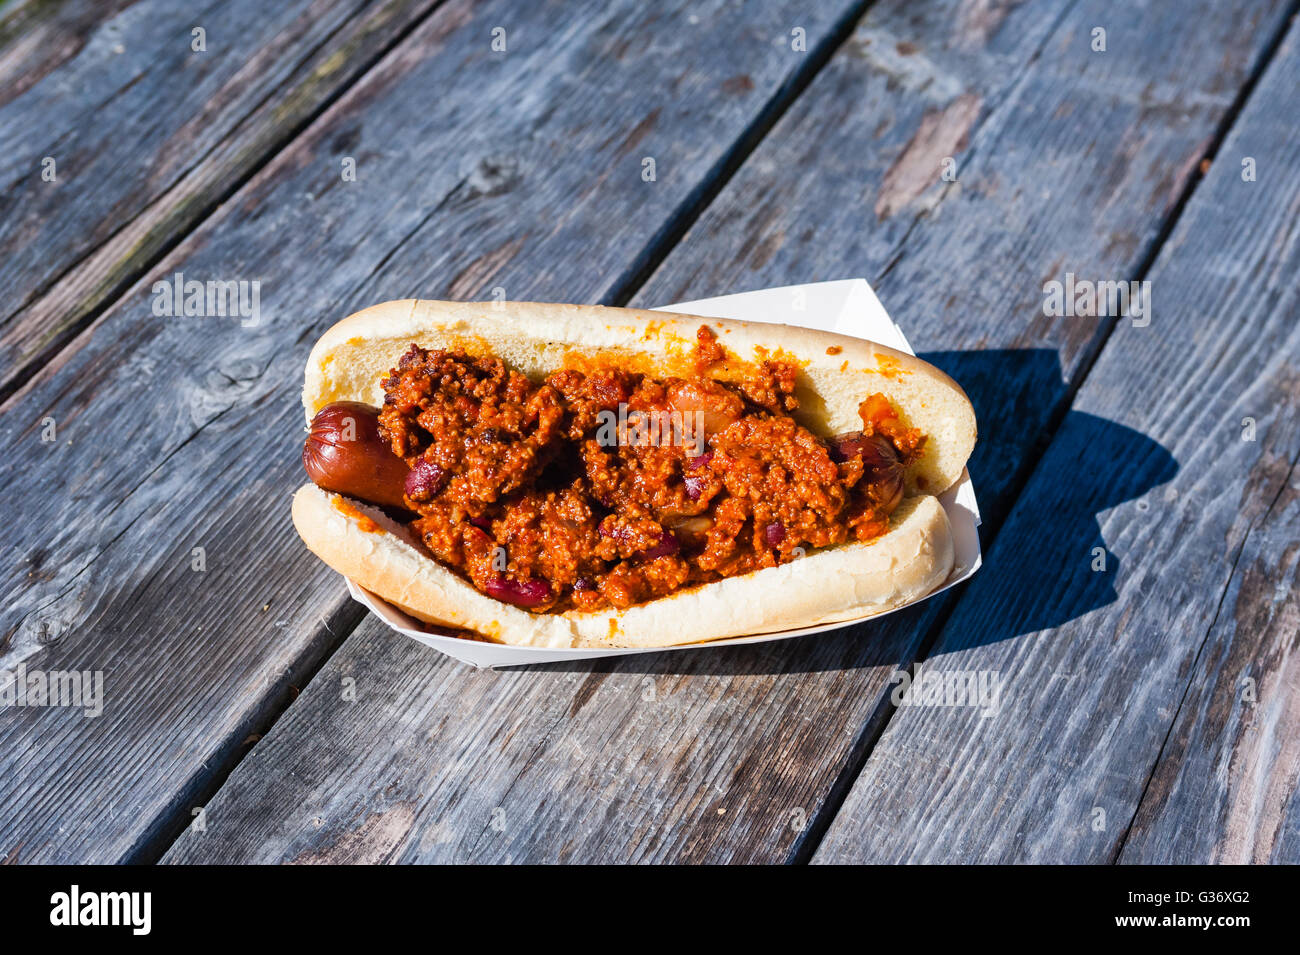 Sausage covered in hot chili on a bun in a paper tray, on weathered gray picnic table. Stock Photo